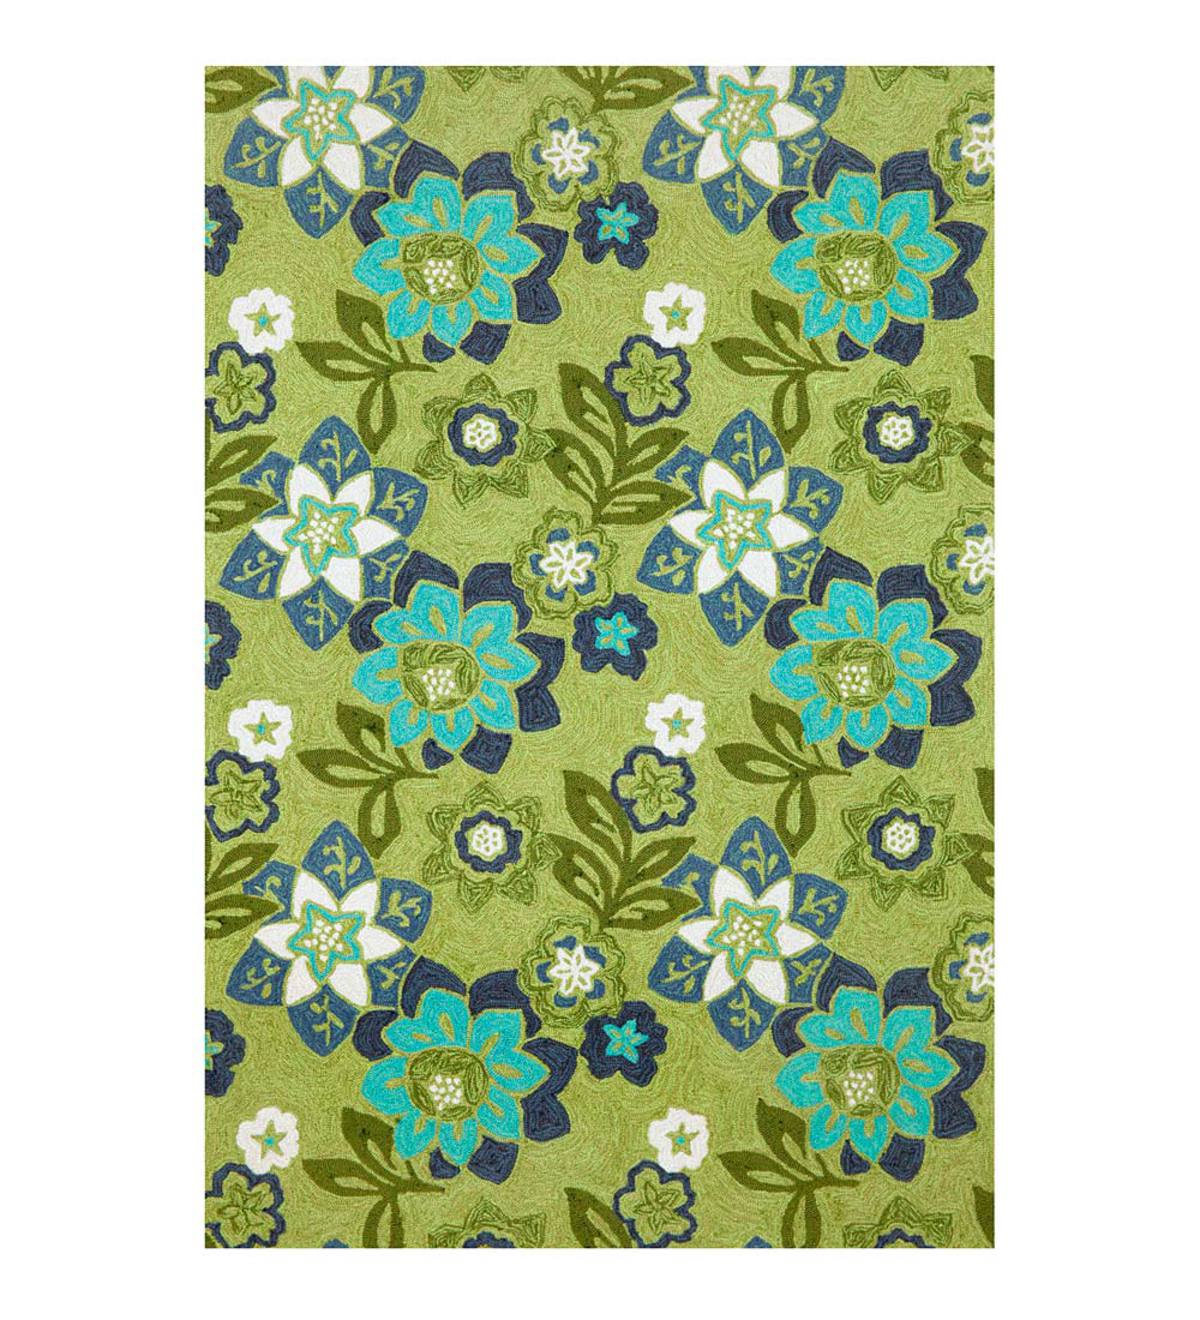 Blue and Green Floral Accent Rug, 42"W x 66"L - Green